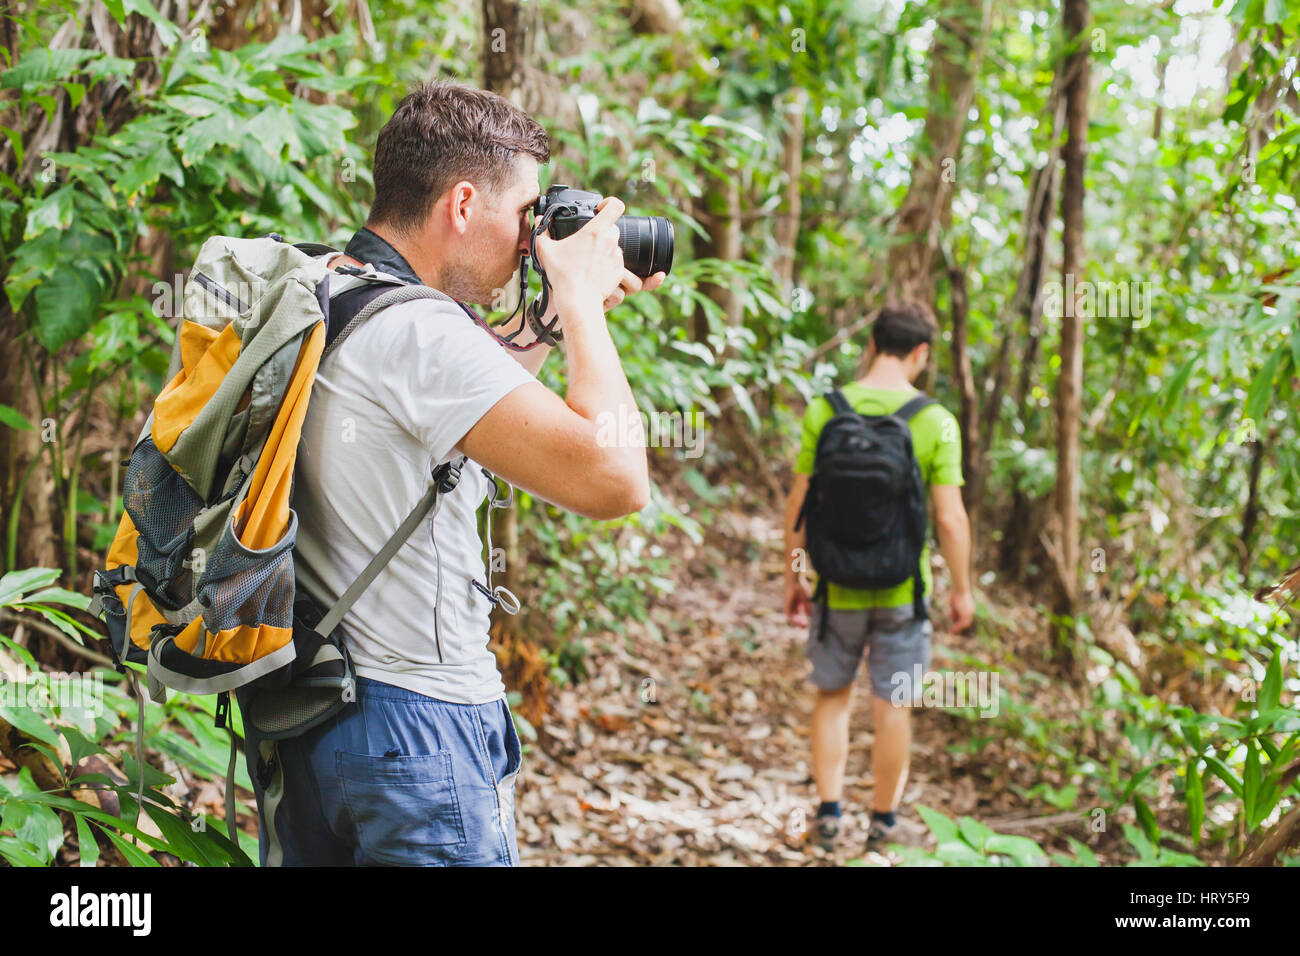 nature photographer in tropical jungle, group of tourists hiking in the forest, man taking photo with big camera Stock Photo